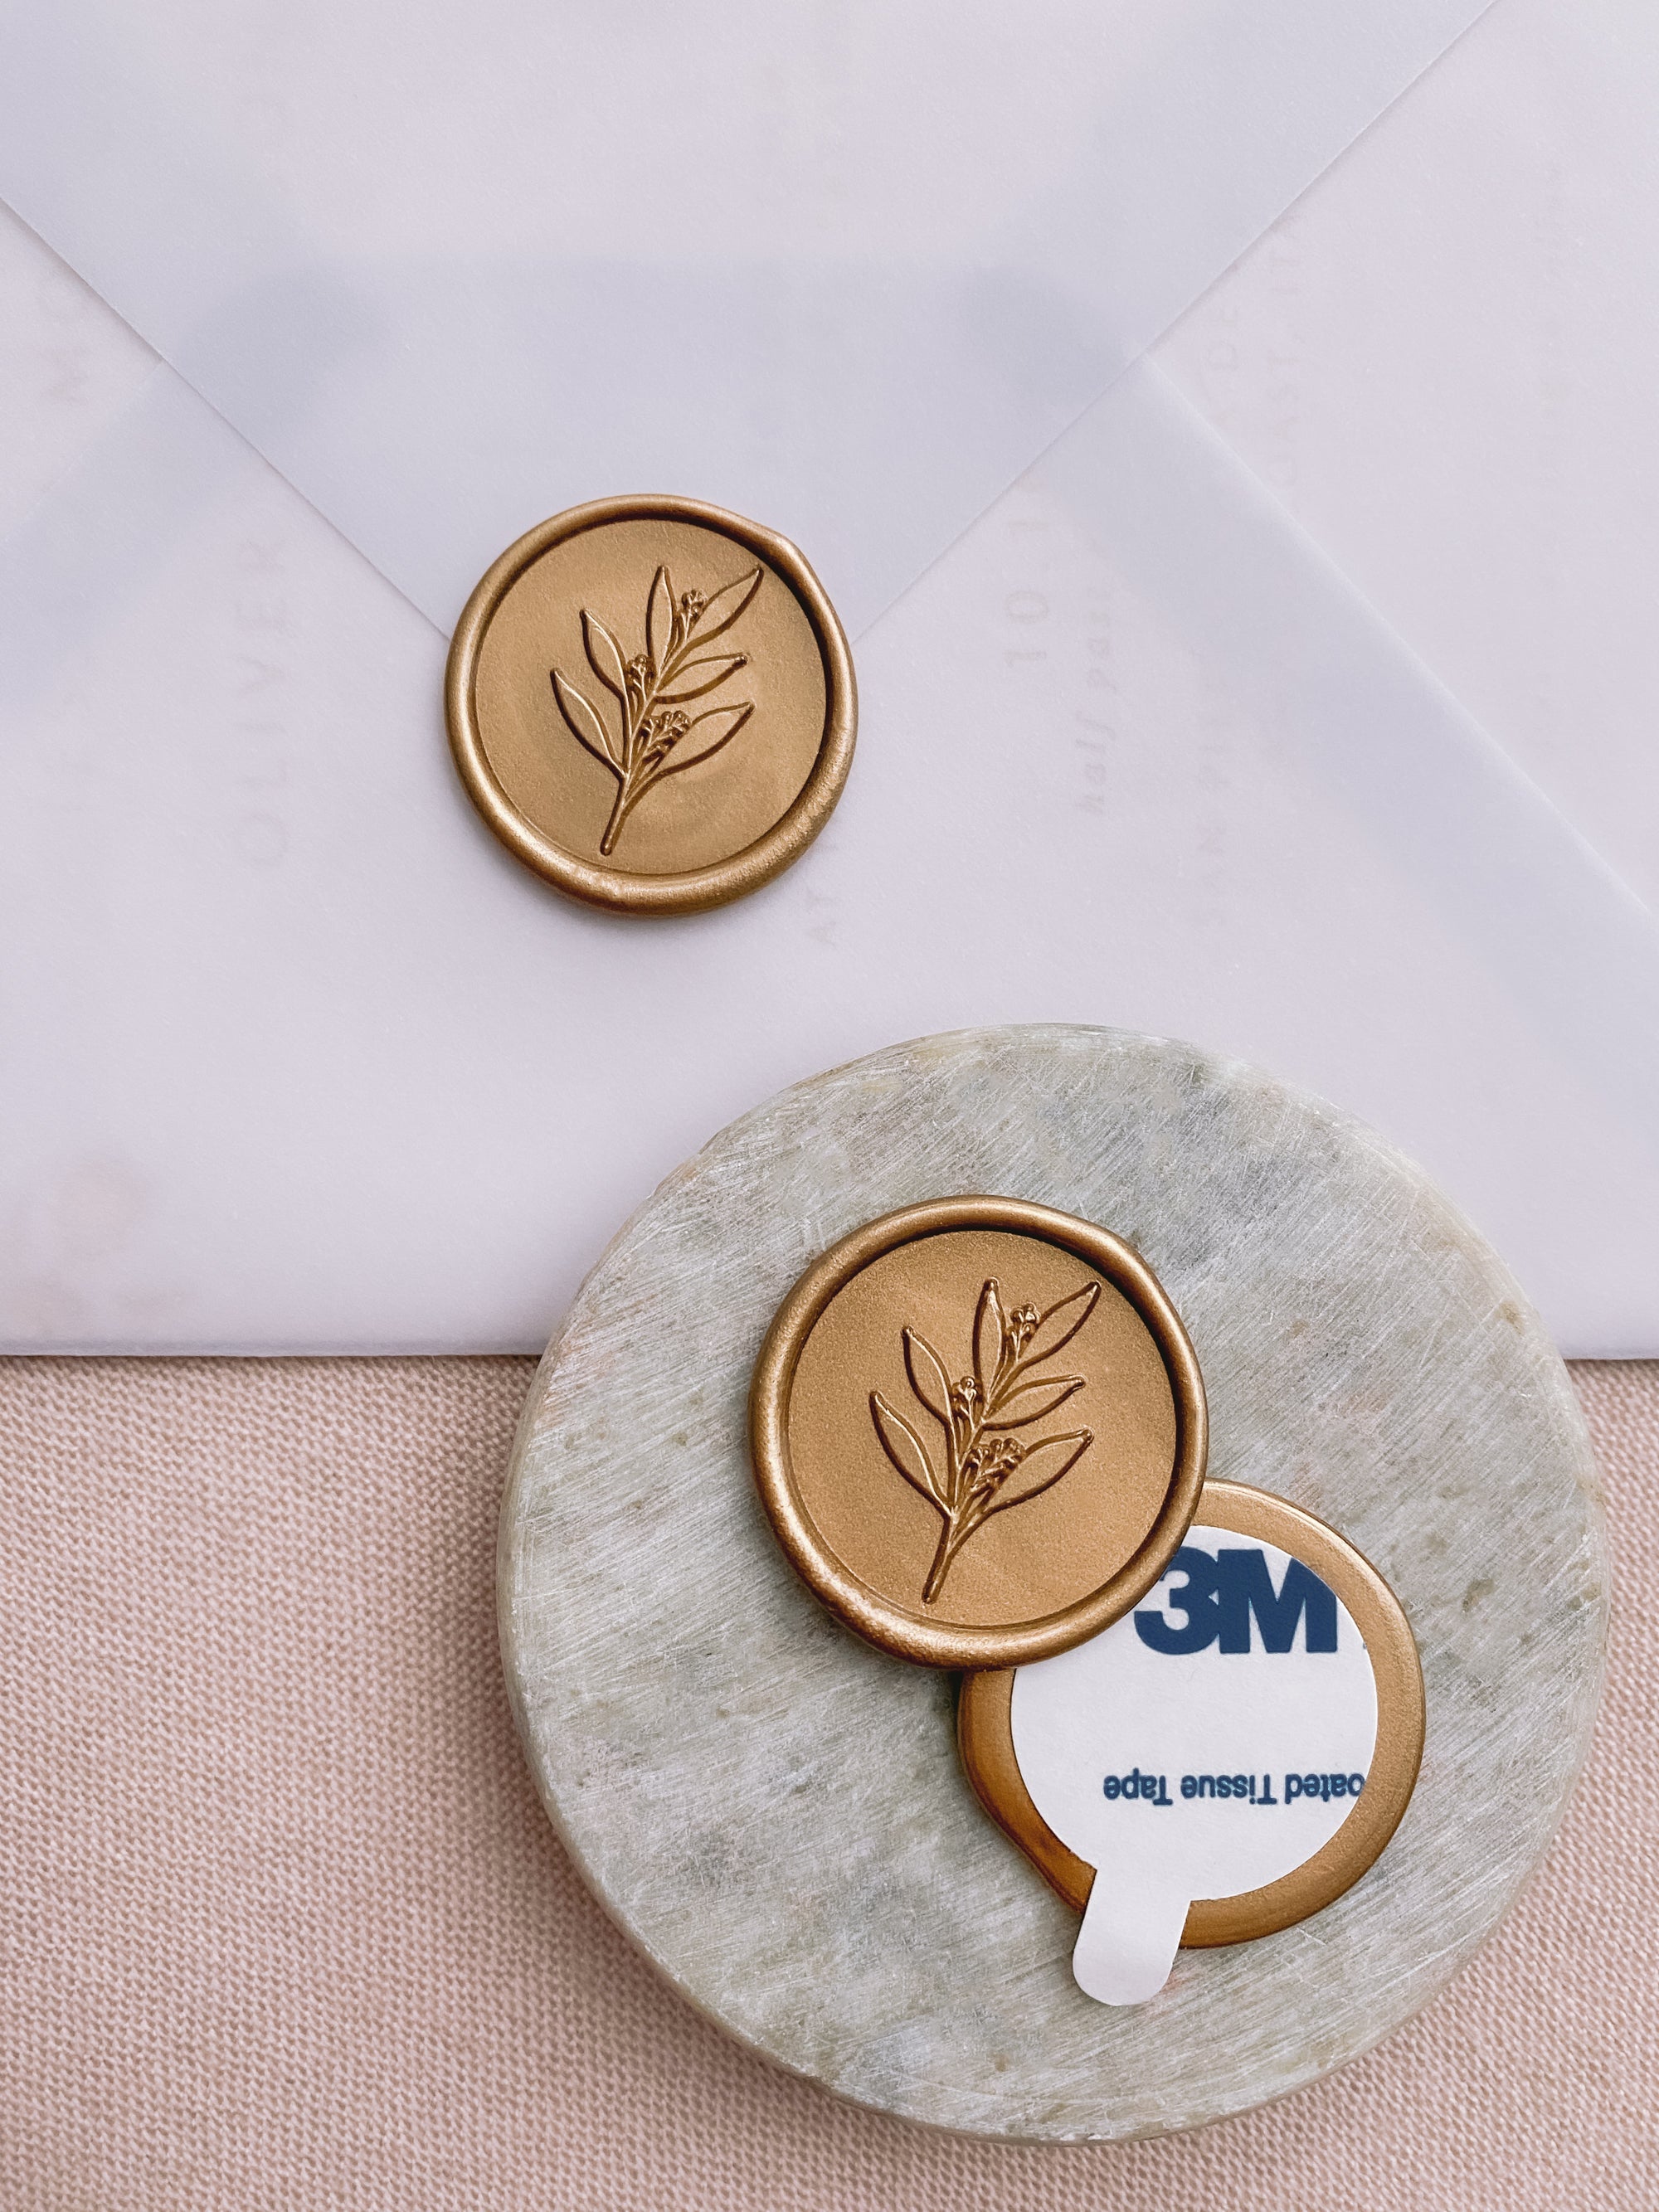 Buy Wax Letter Seals & Premade Impressions